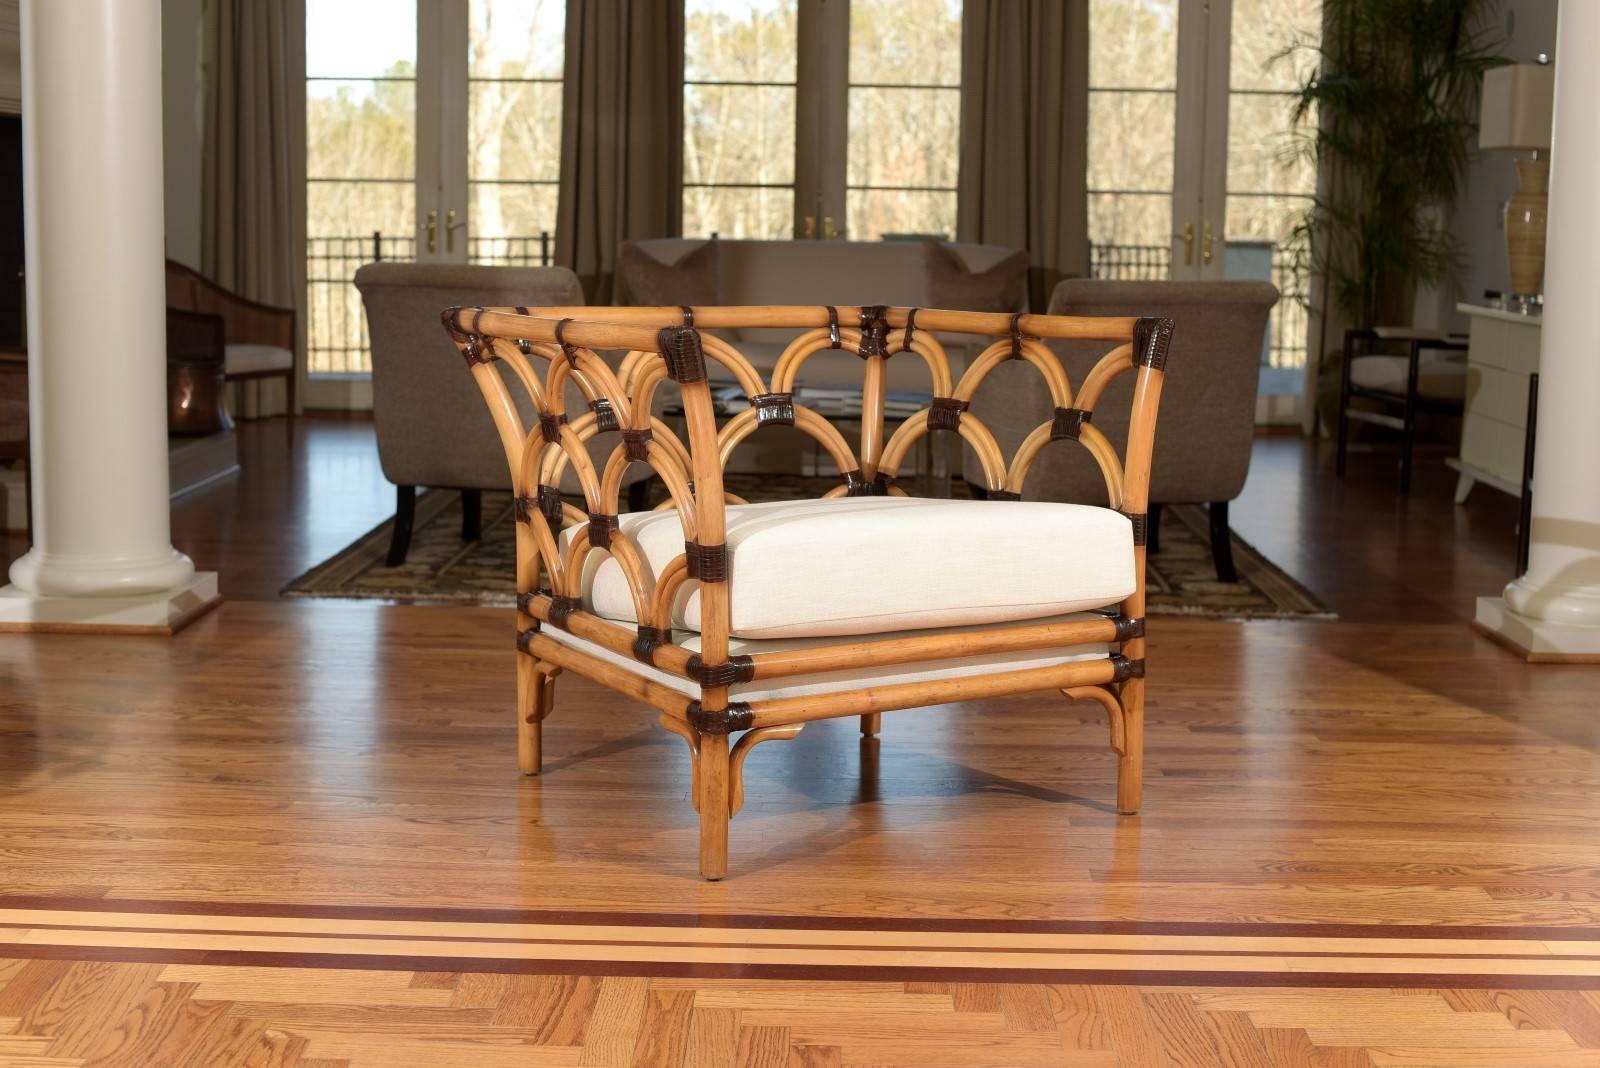 These magnificent club chairs are shipped as professionally photographed and described in the listing narrative: Meticulously professionally restored and installation ready. Expert custom upholstery service is available.

A room-defining pair of